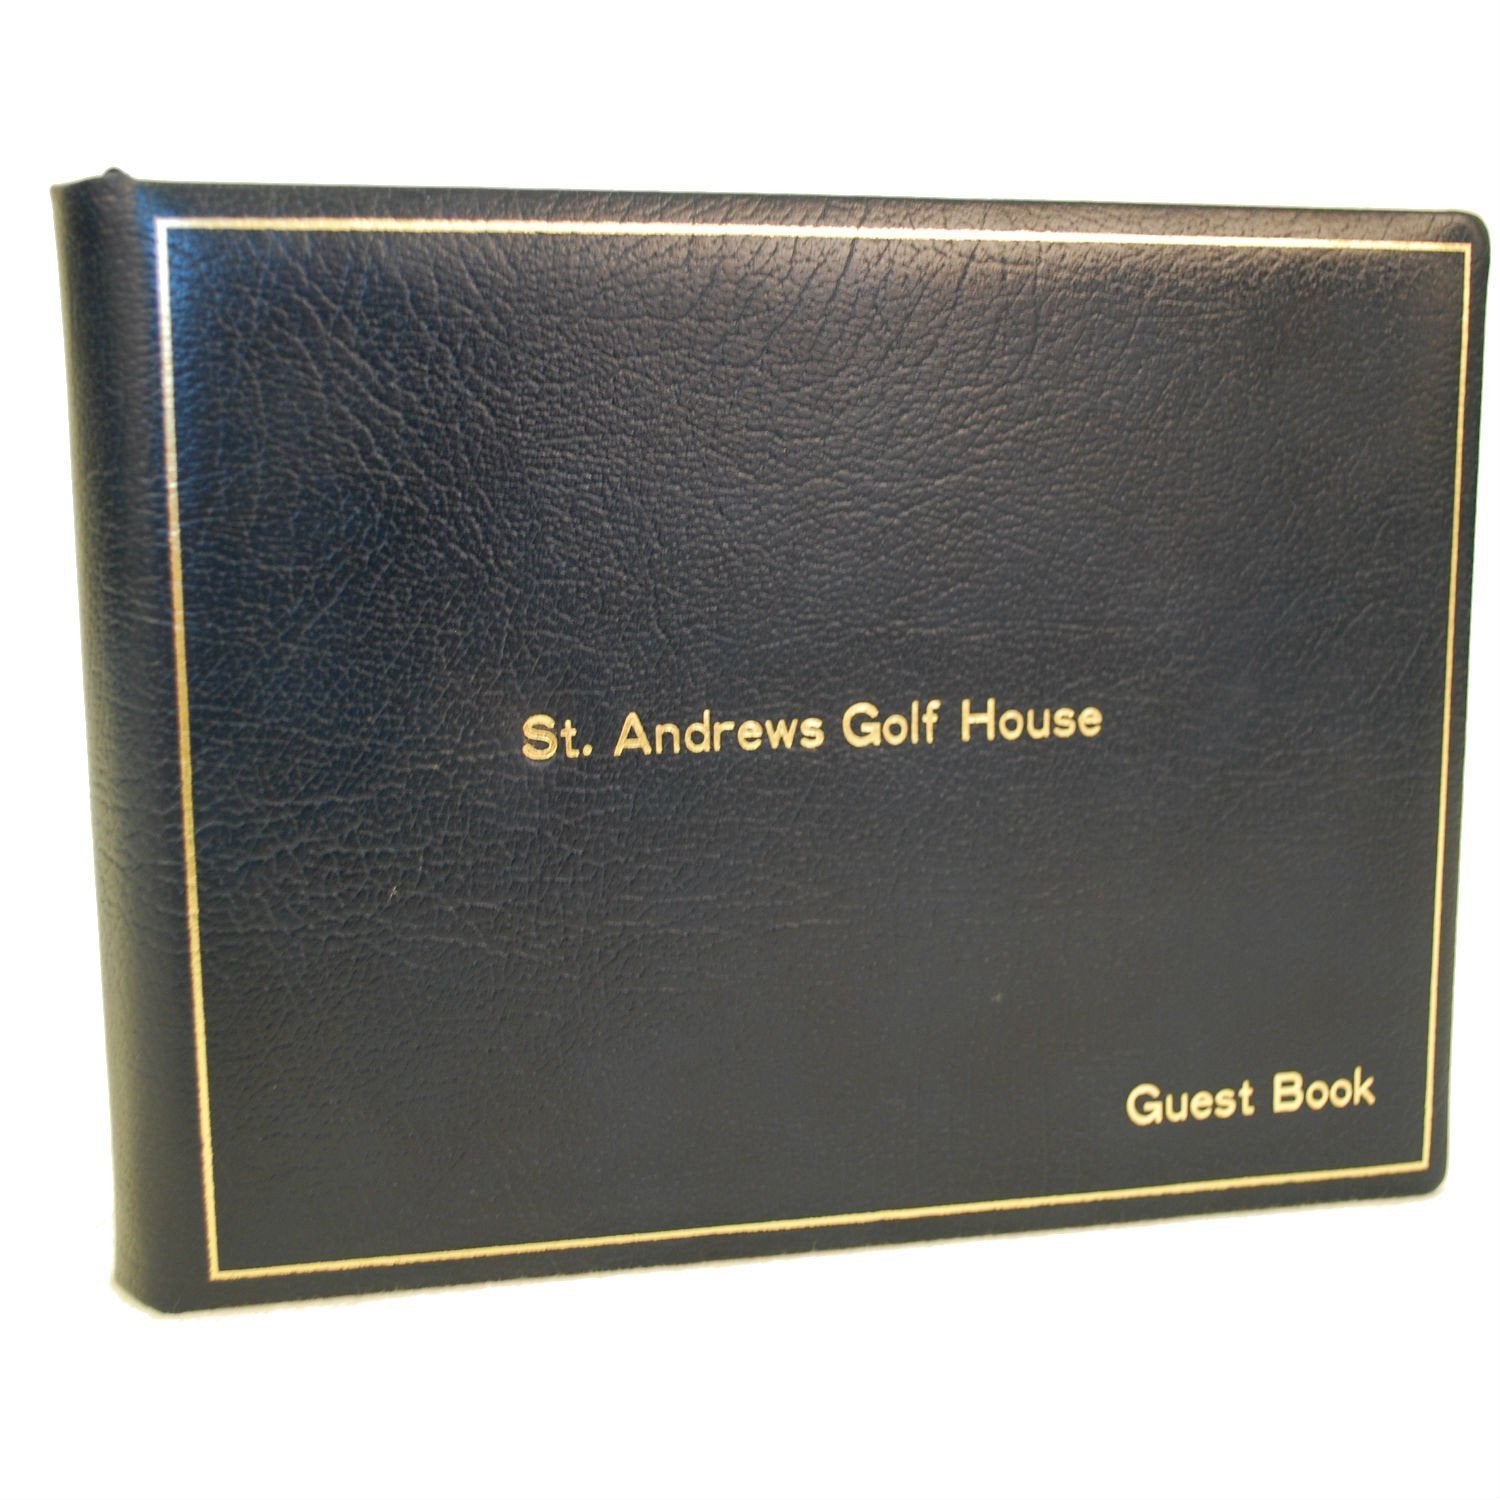 Guest Book Register | 7 by 9 Inches | Name, Date, Address | Made in England | Charing Cross-Guest Book-Sterling-and-Burke